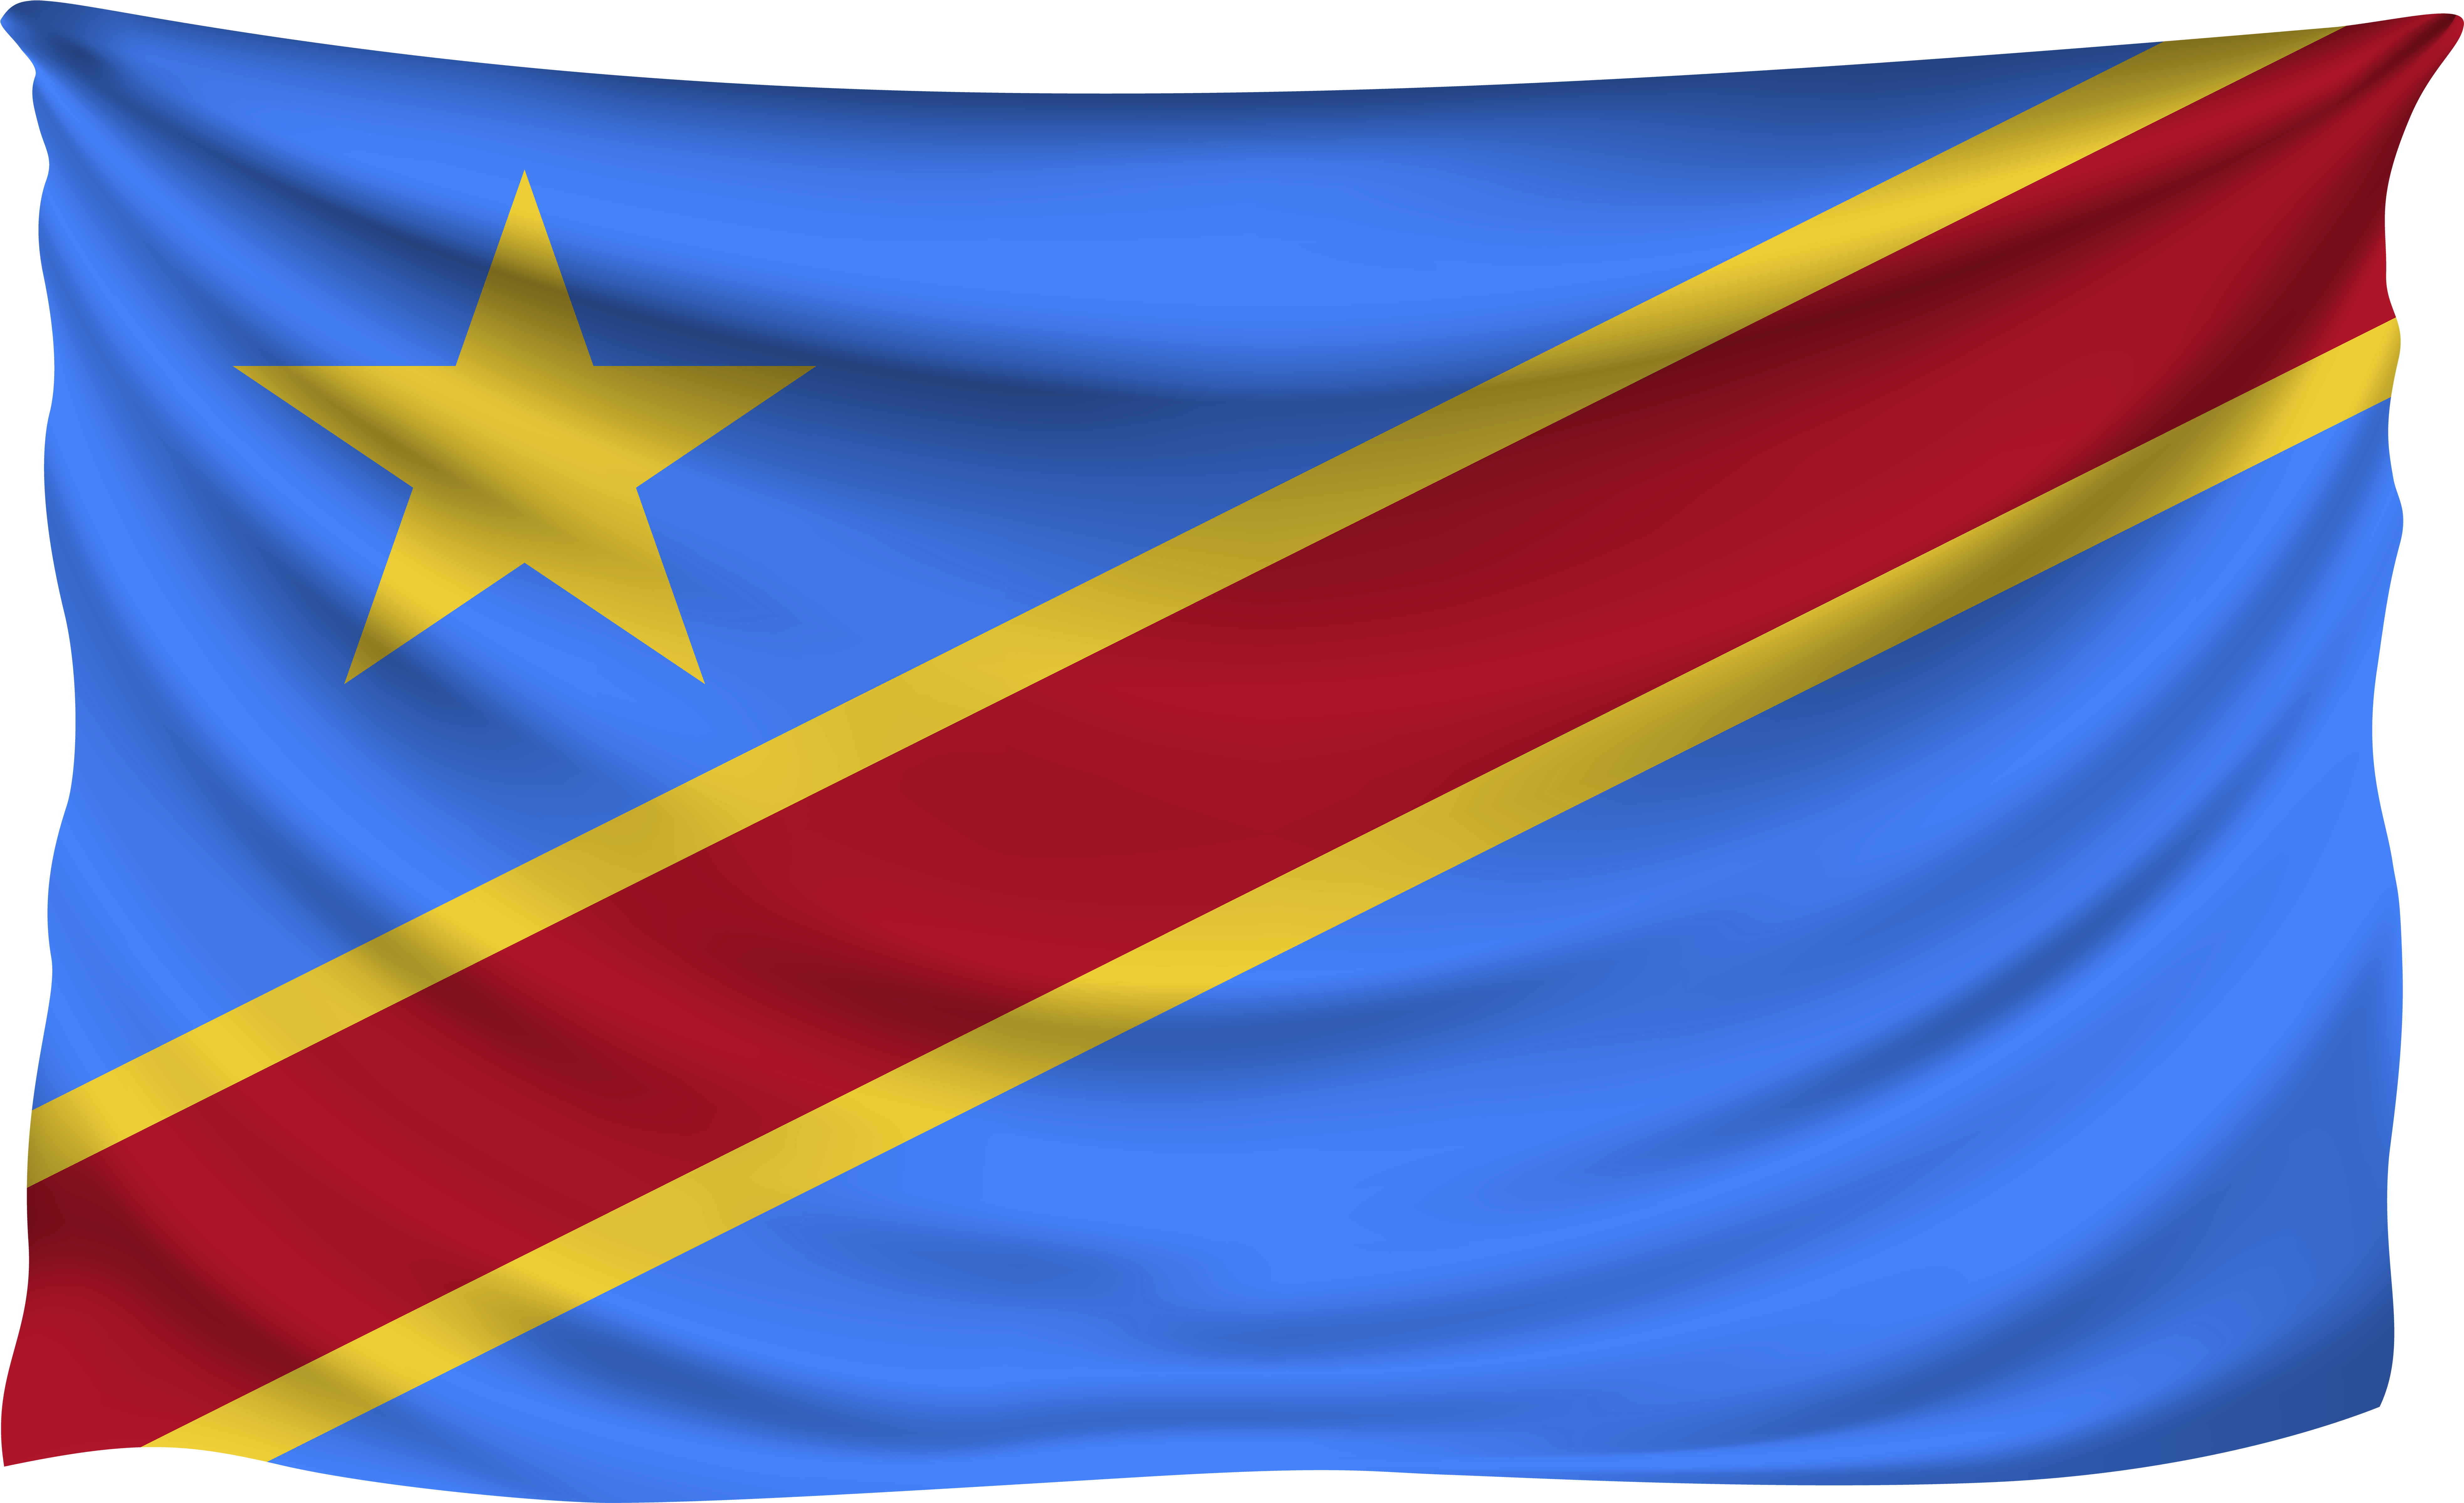 A Blue Flag With A Red Stripe And A Yellow Star